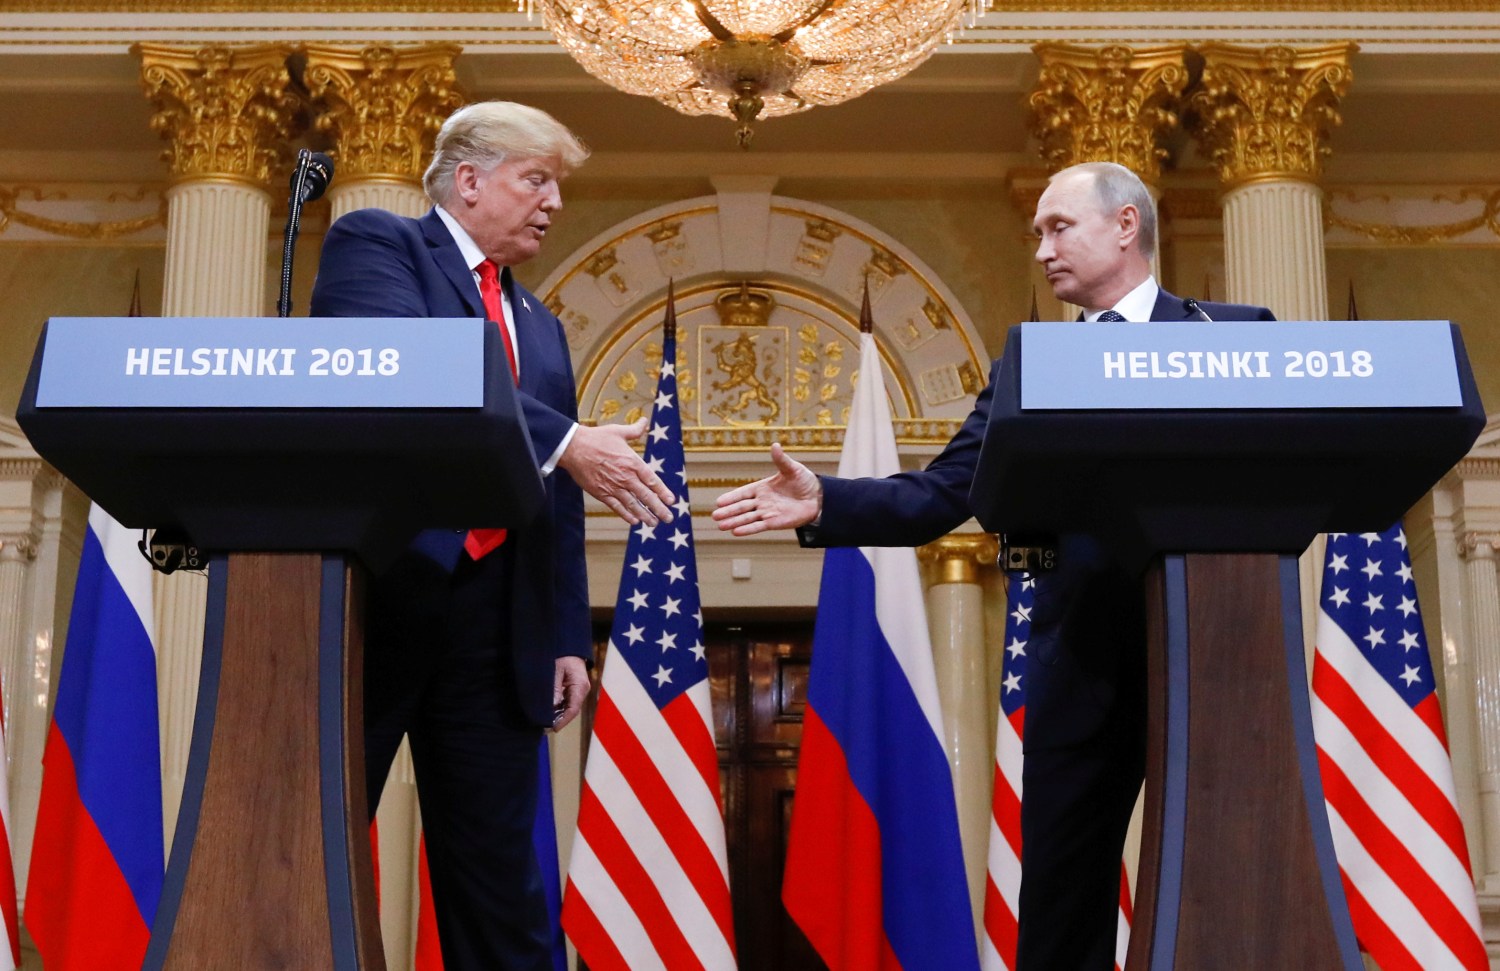 U.S. President Donald Trump and Russia's President Vladimir Putin shake hands during a joint news conference after their meeting in Helsinki, Finland, July 16, 2018. REUTERS/Kevin Lamarque - RC145902DE10